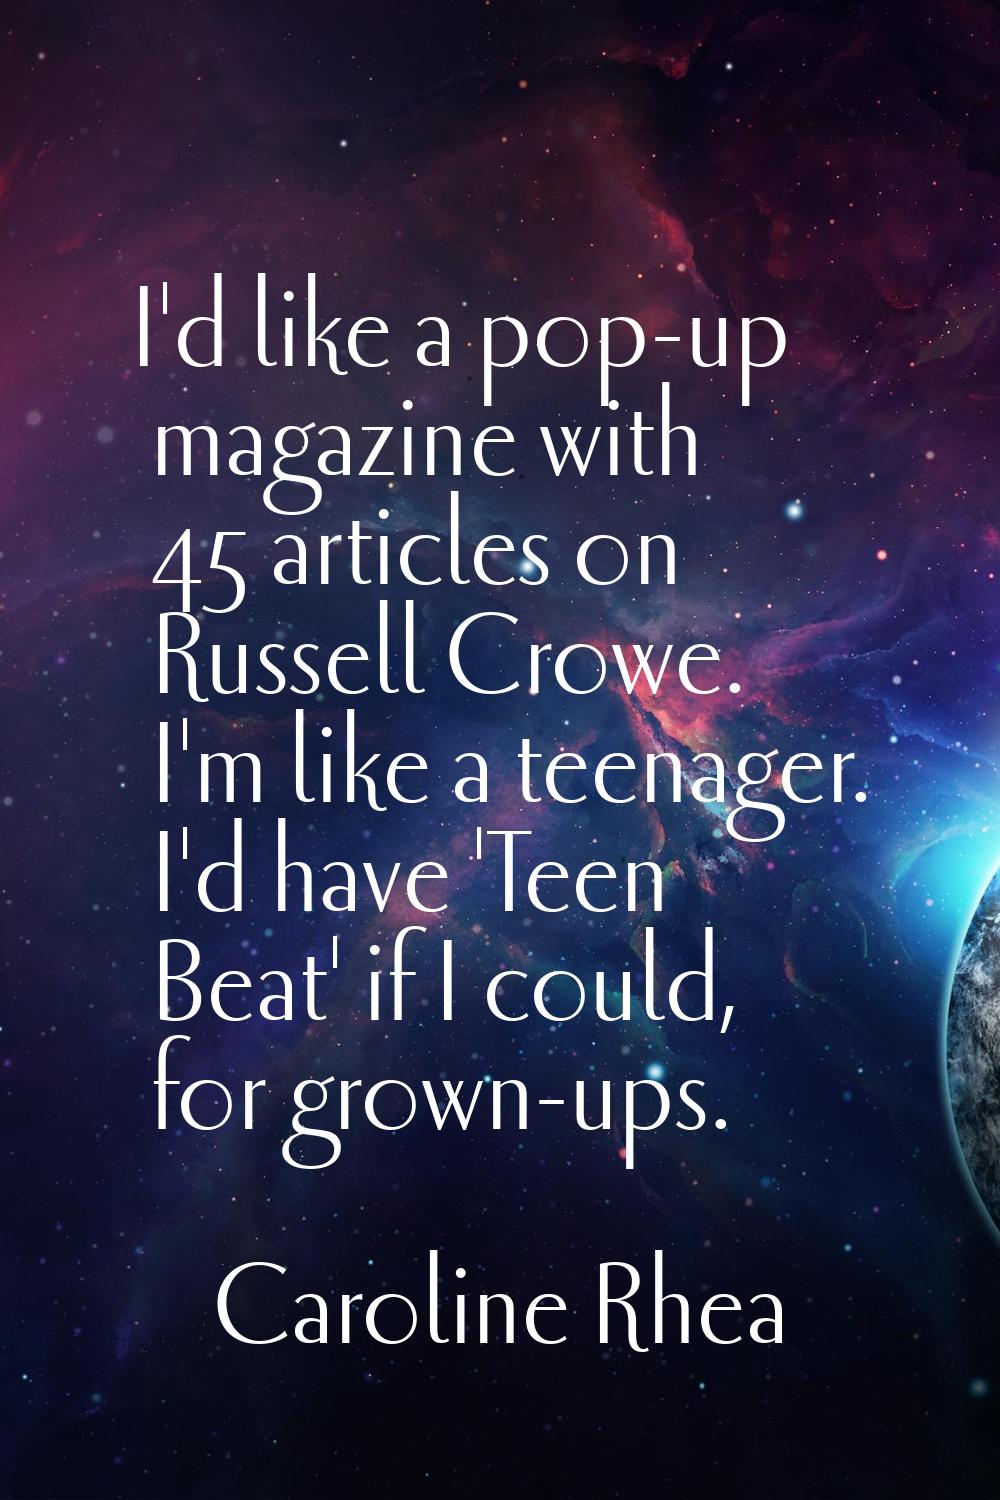 I'd like a pop-up magazine with 45 articles on Russell Crowe. I'm like a teenager. I'd have 'Teen B